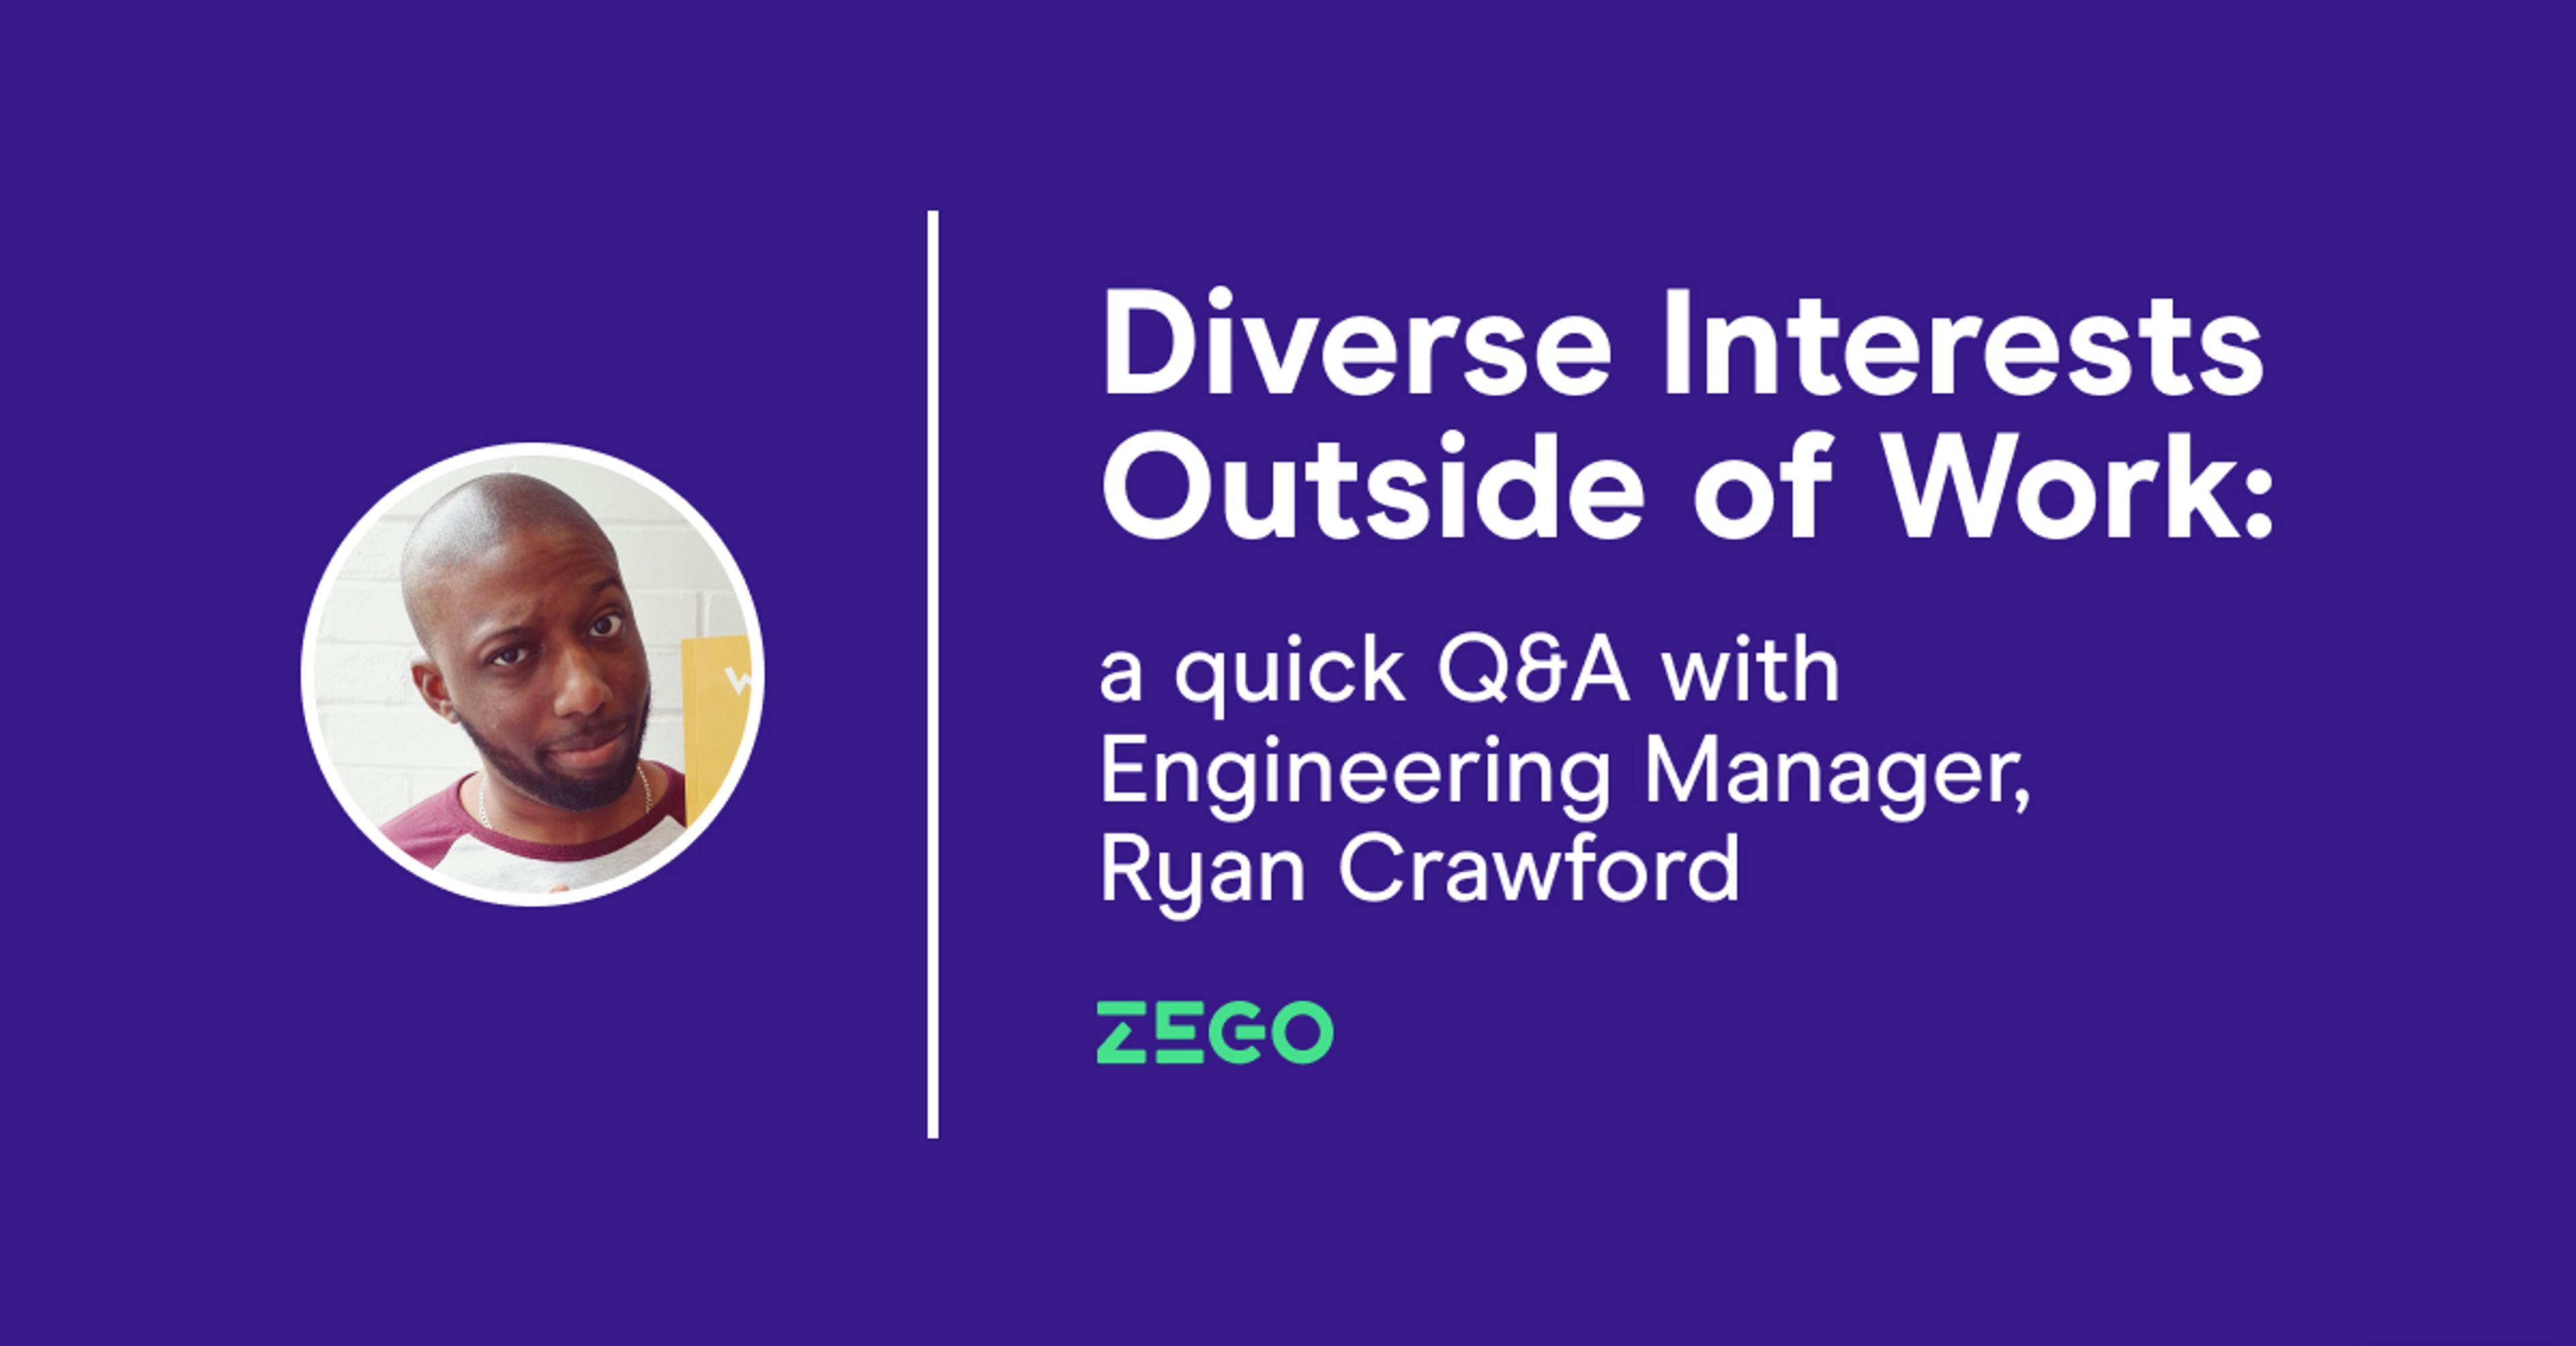 Diverse Interests Outside of Work: a quick Q&A with Engineering Manager, Ryan Crawford